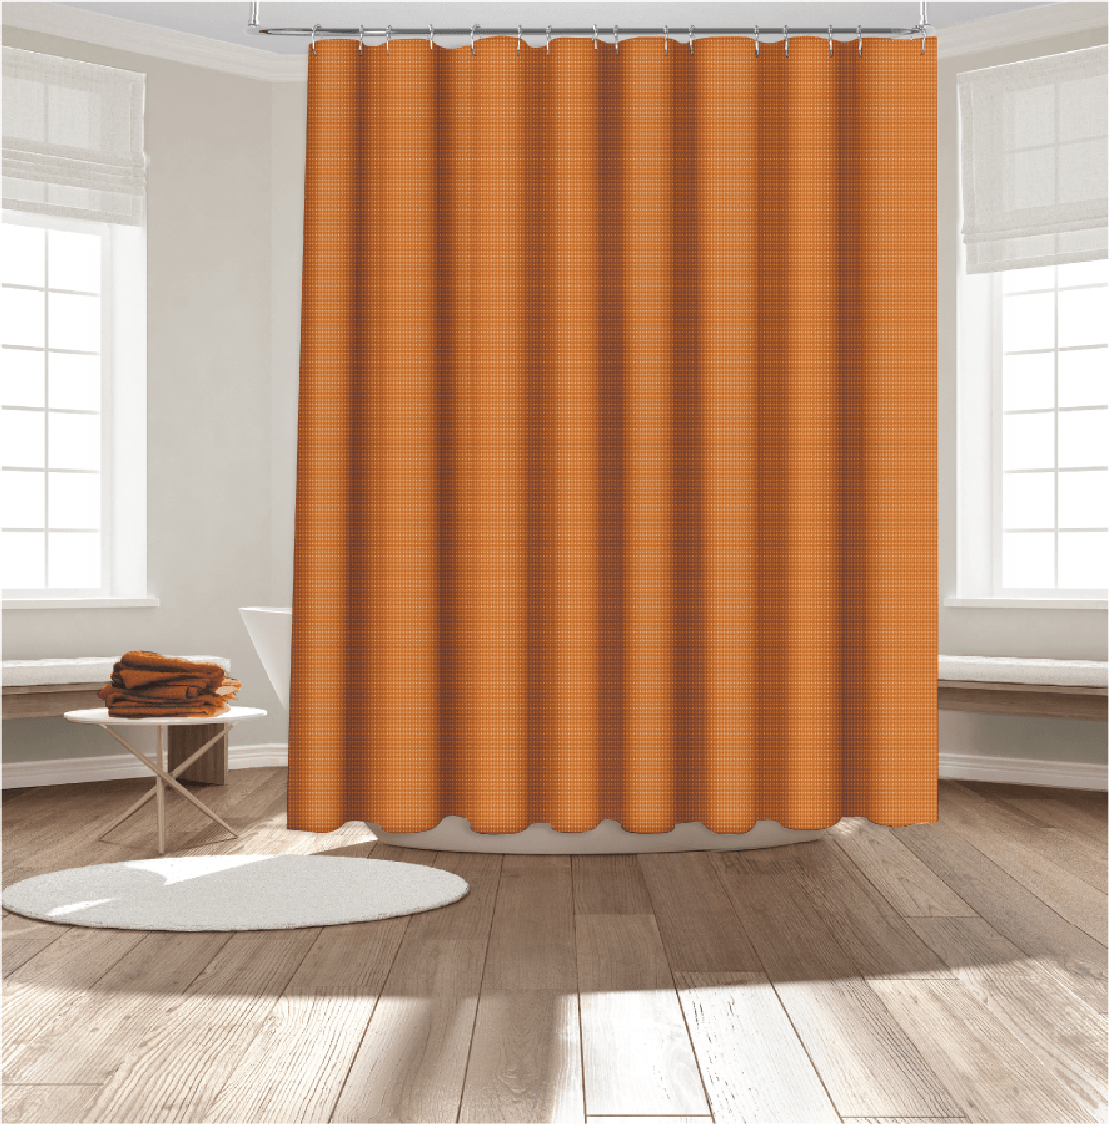 14 Pieces Peach Caramel Roaring Fork Shower Curtain with Liner